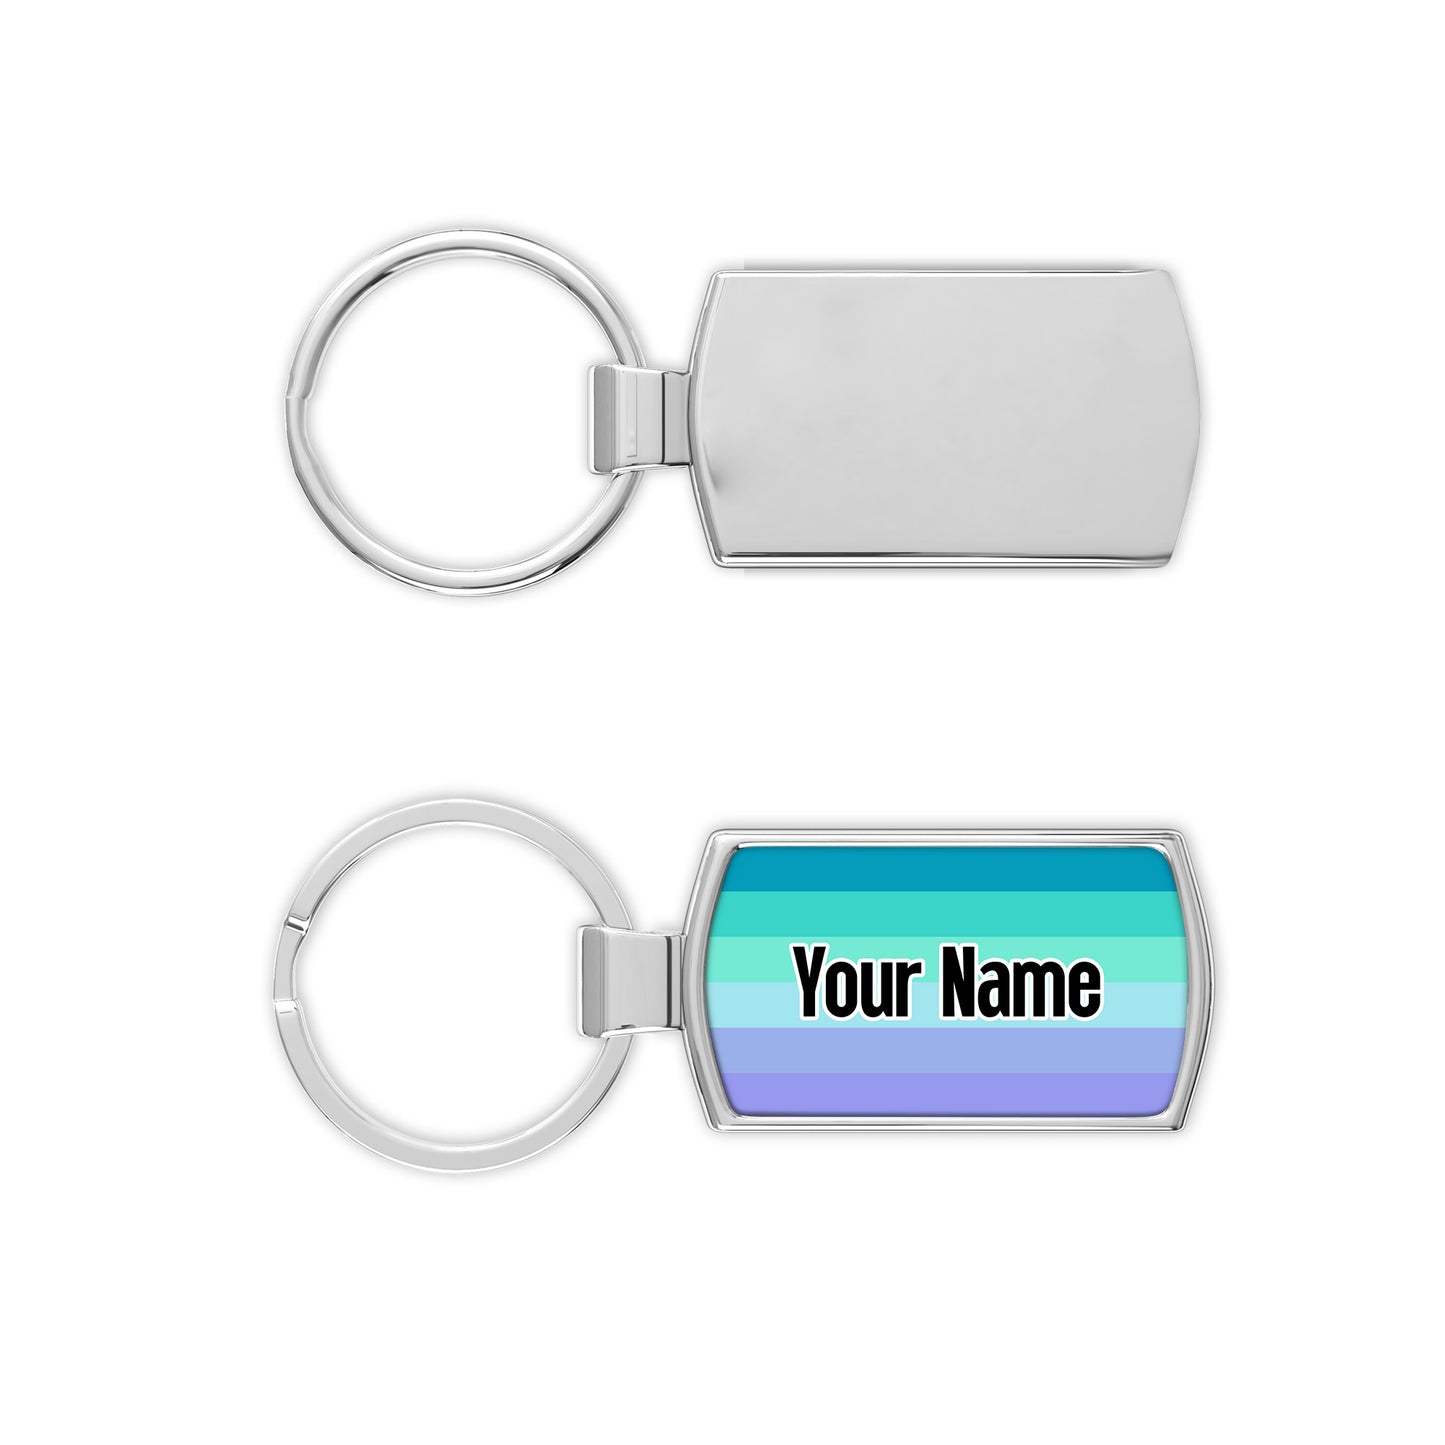 Neptunic pride flag metal keyring personalised with your name